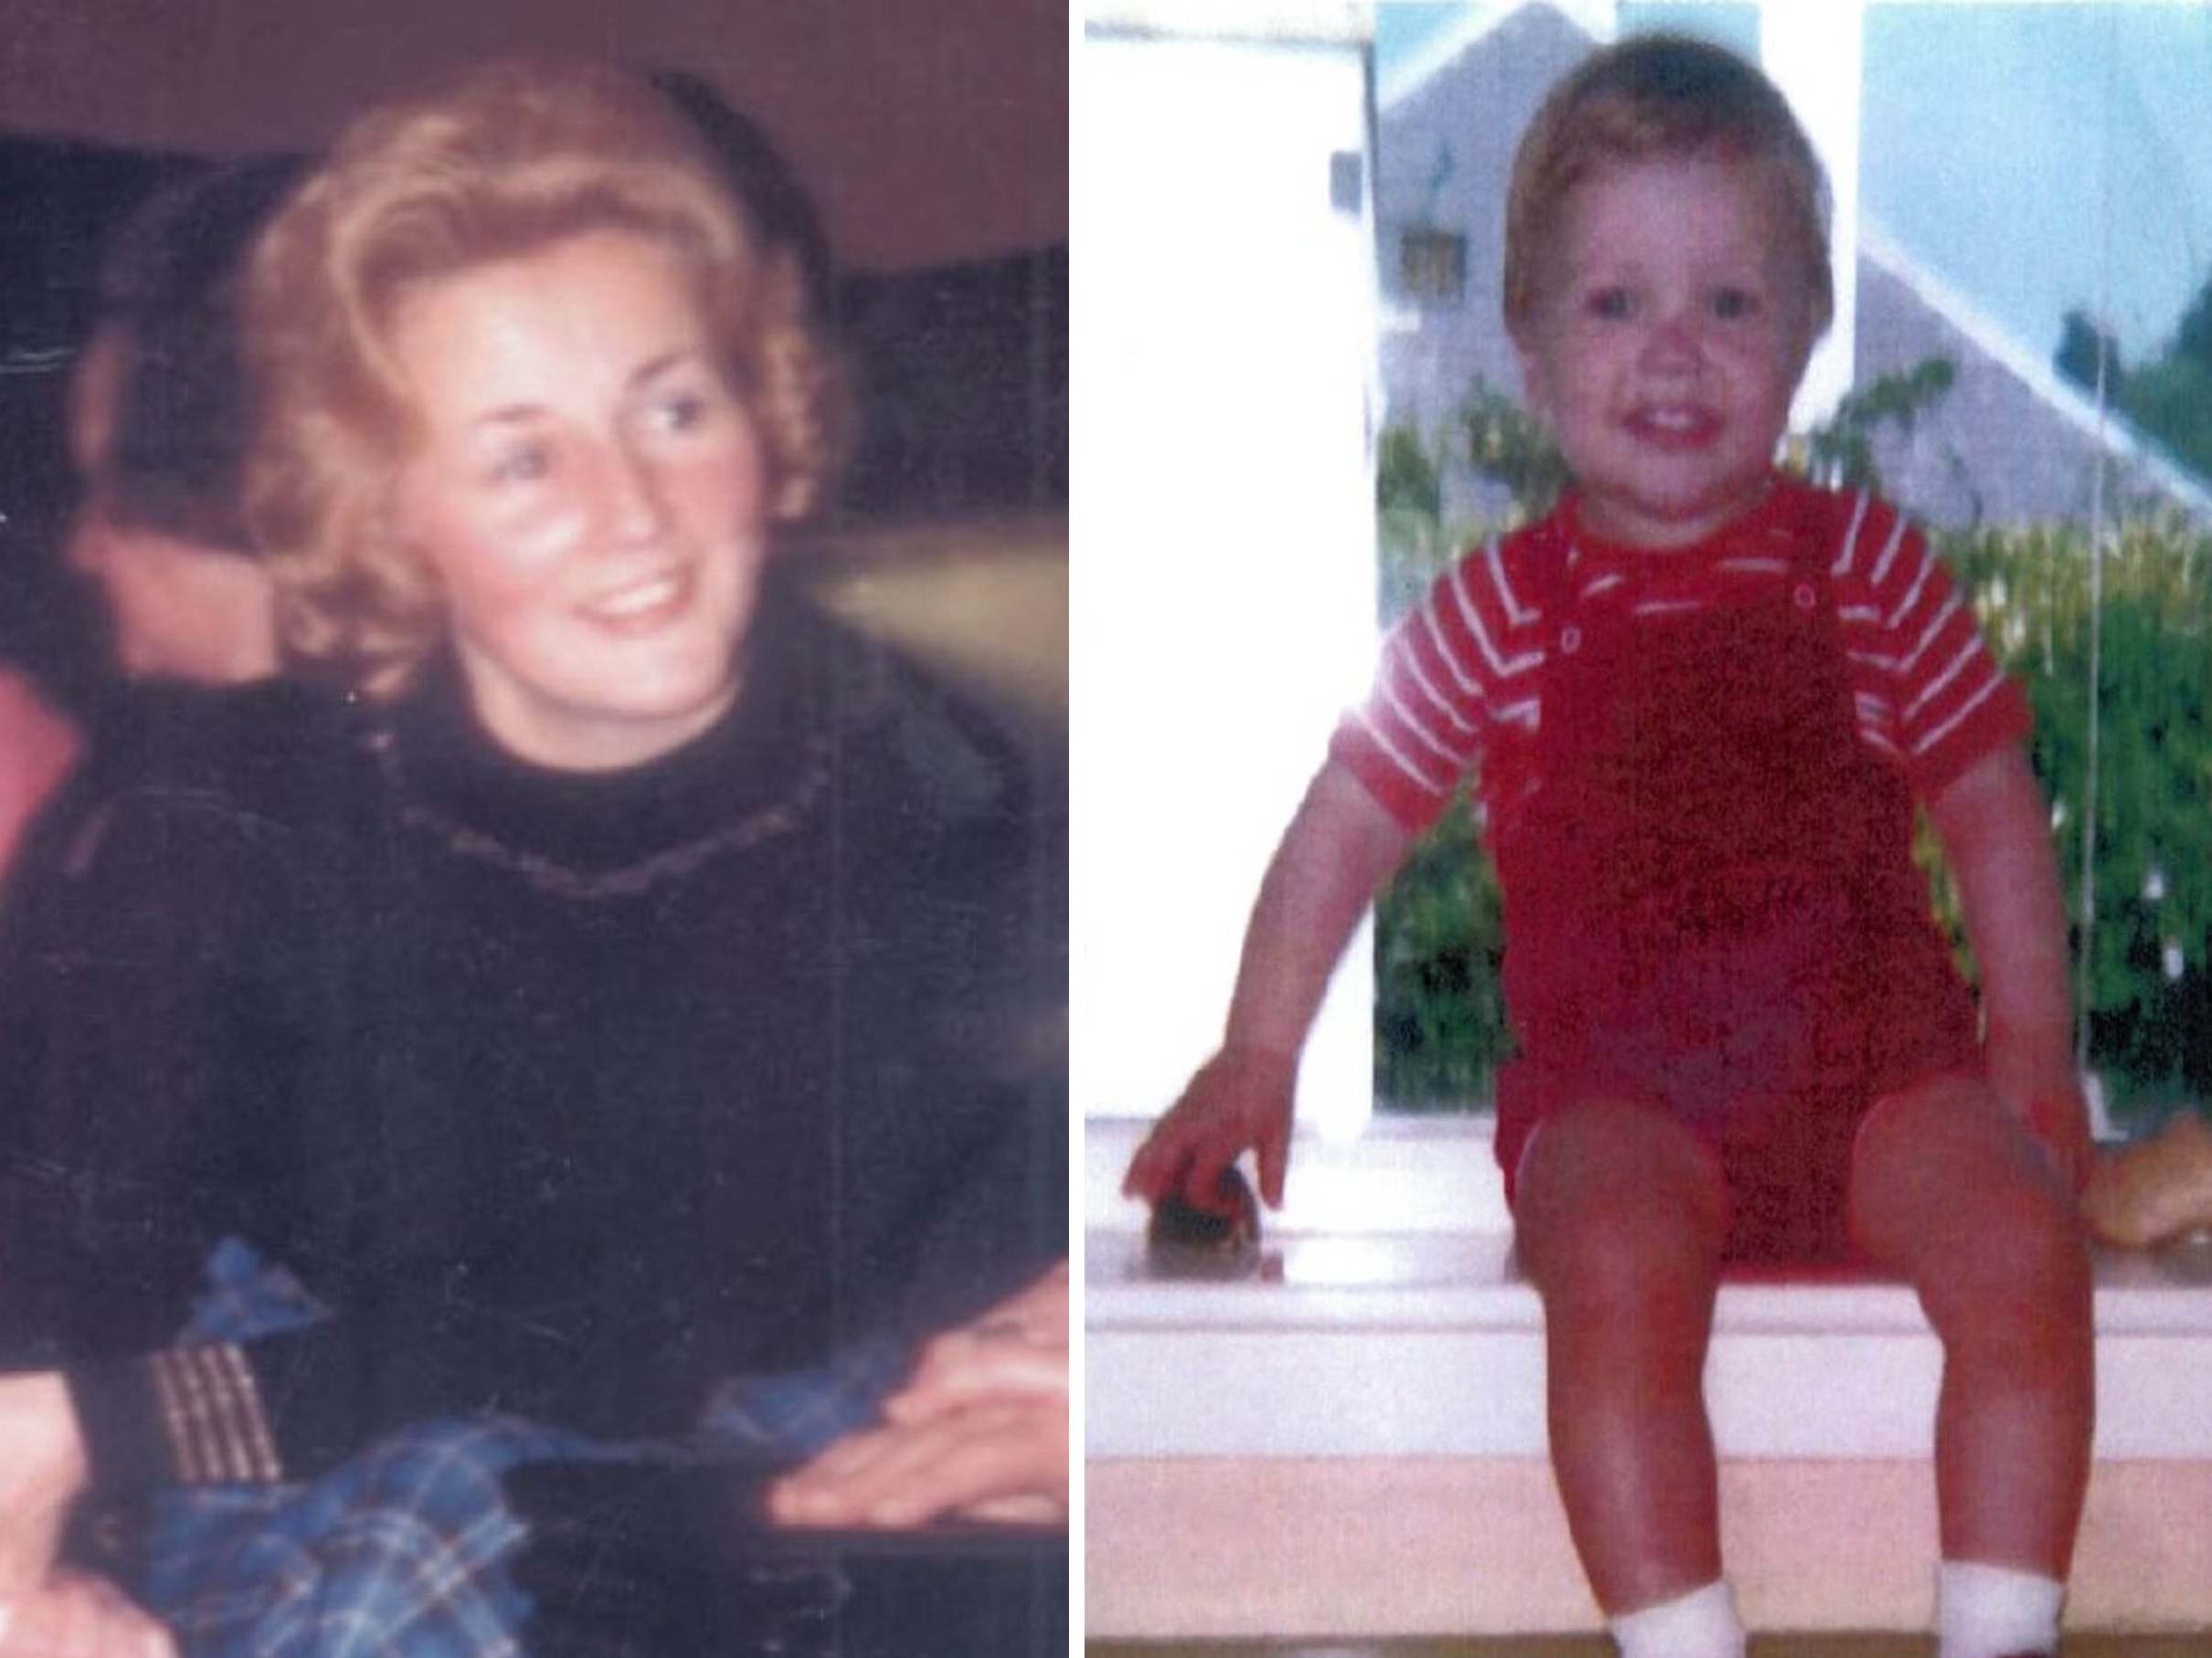 Renee MacRae and her three-year-old son Andrew disappeared without trace on 12 November 1976